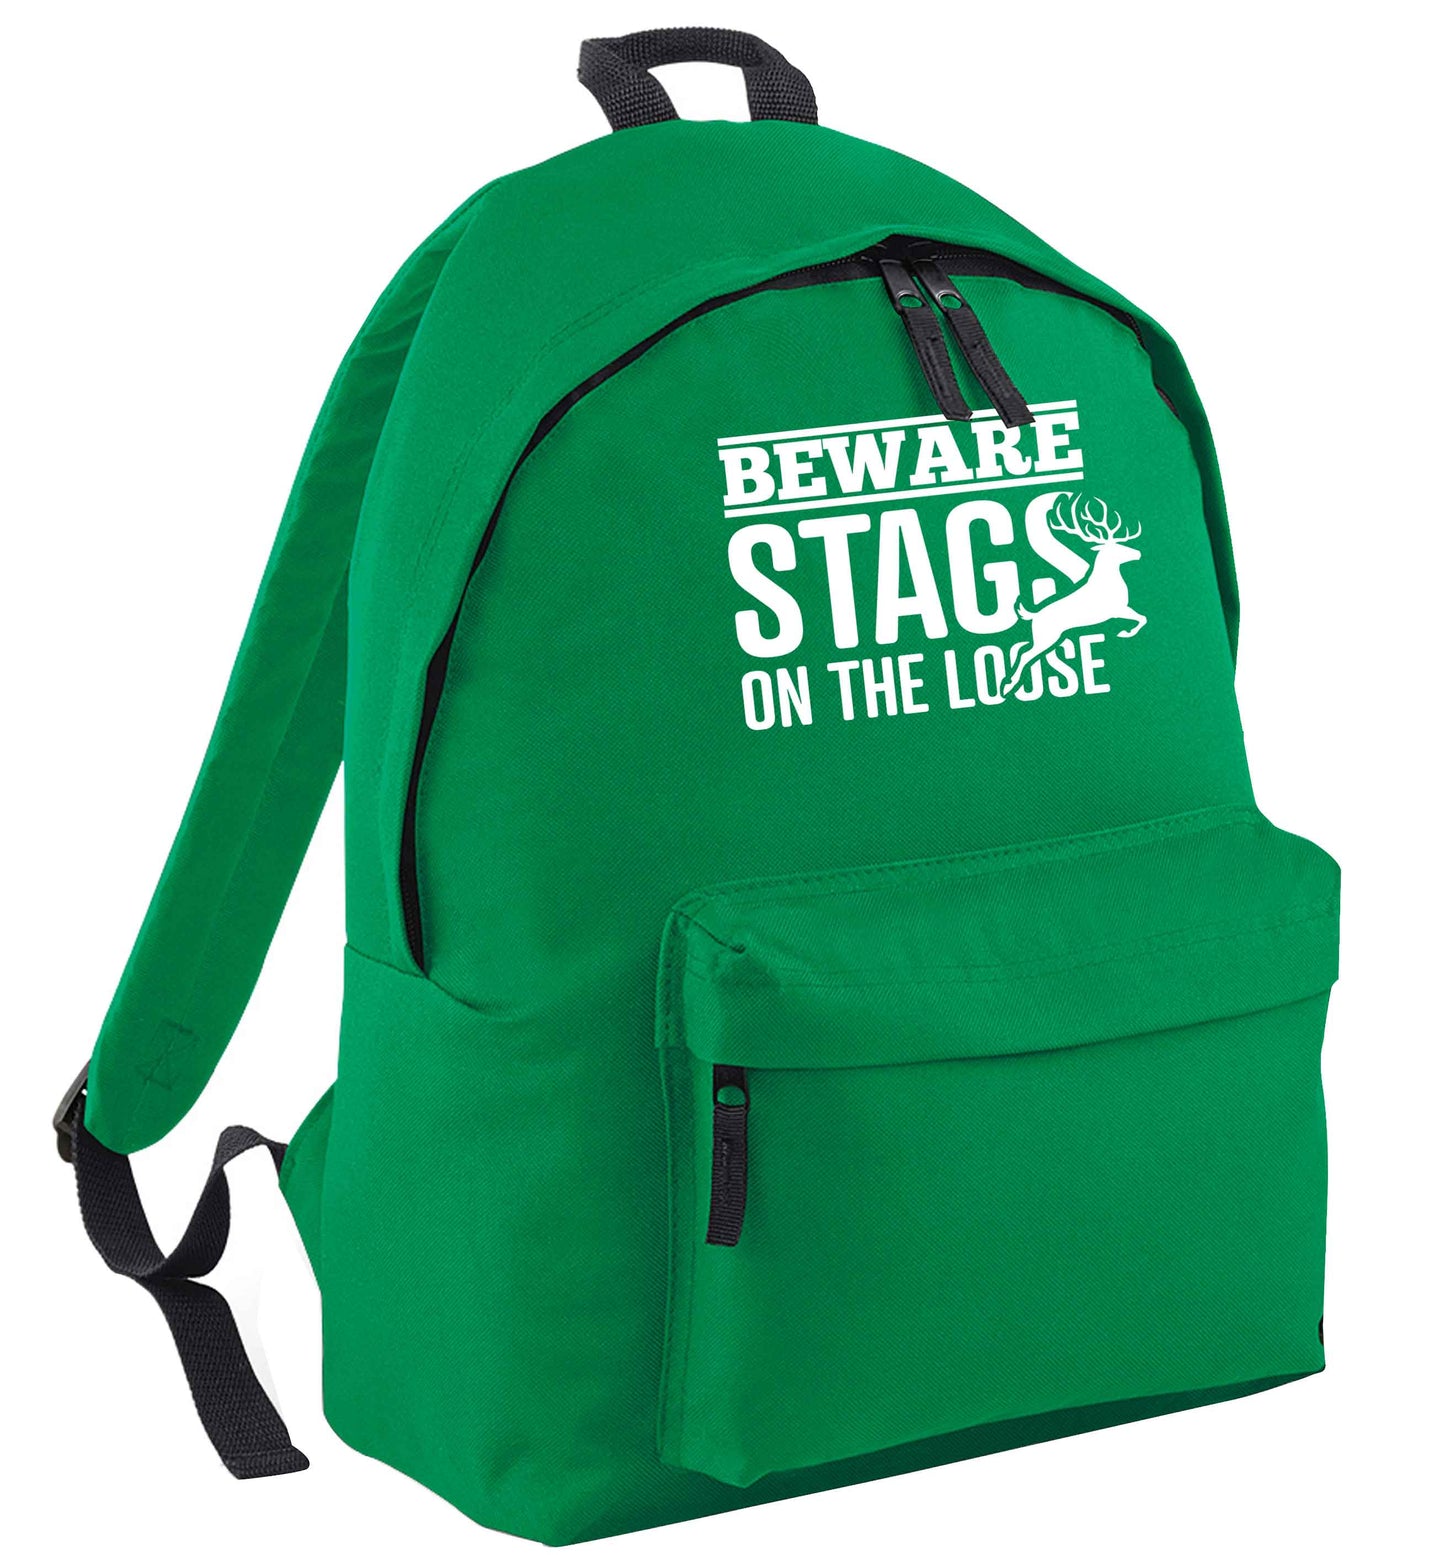 Beware stags on the loose green adults backpack